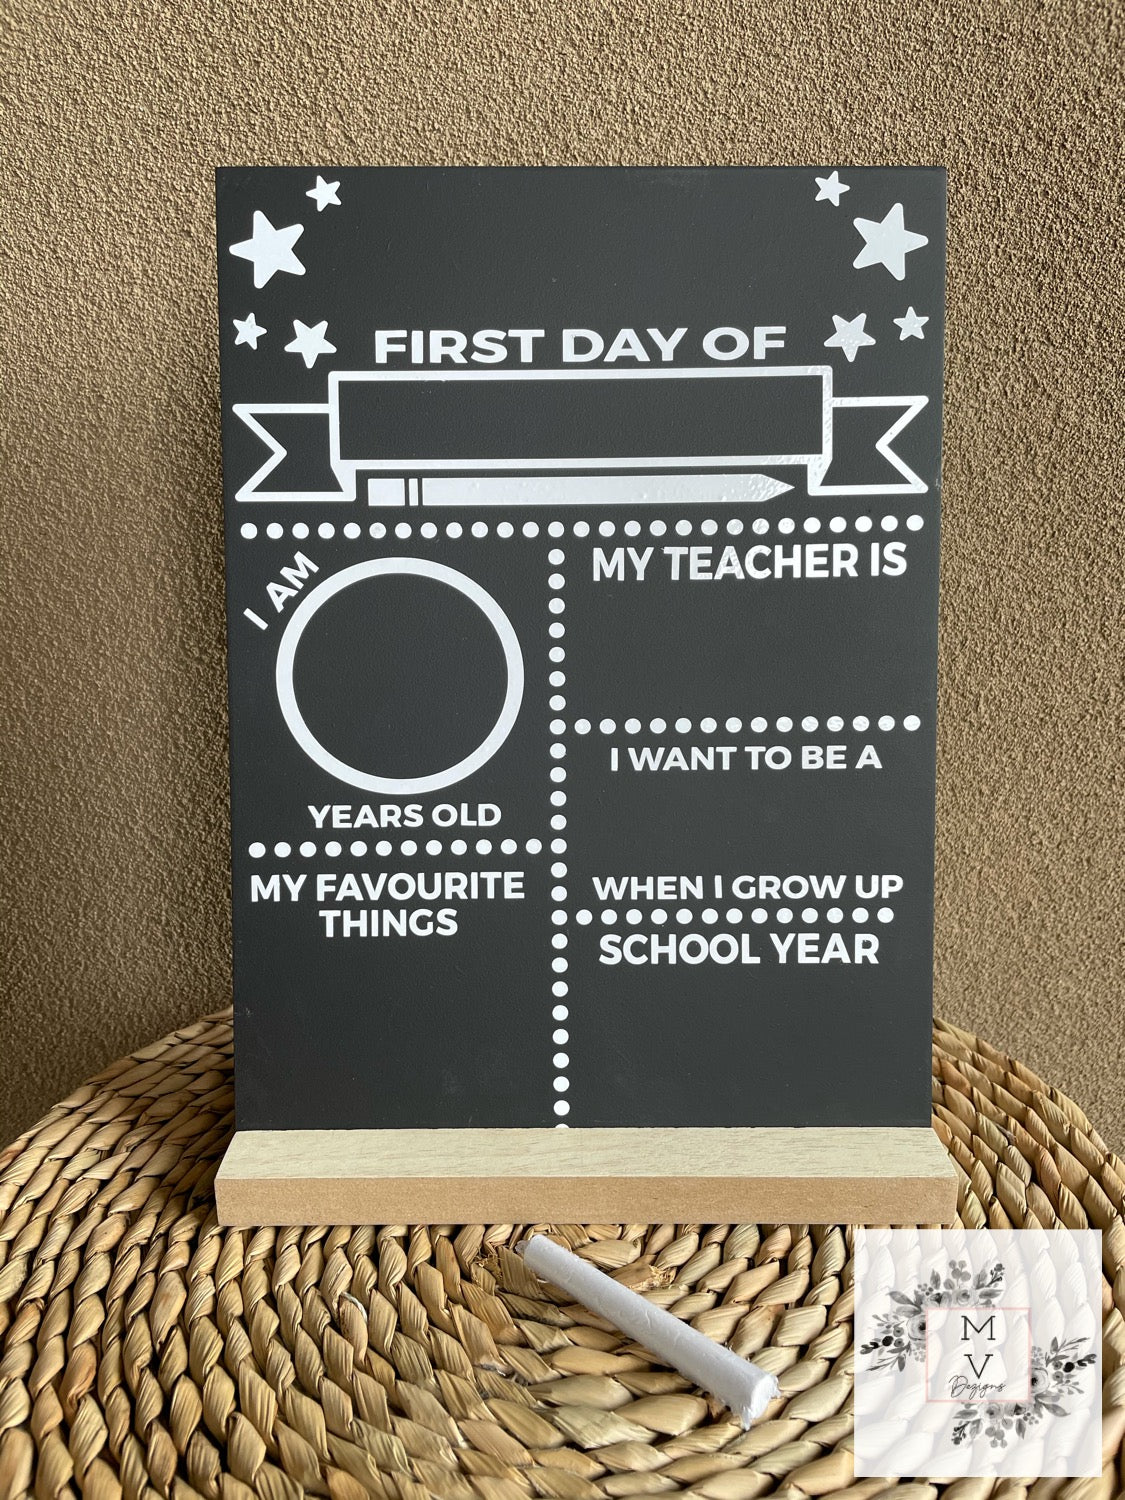 First Day Milestone Boards